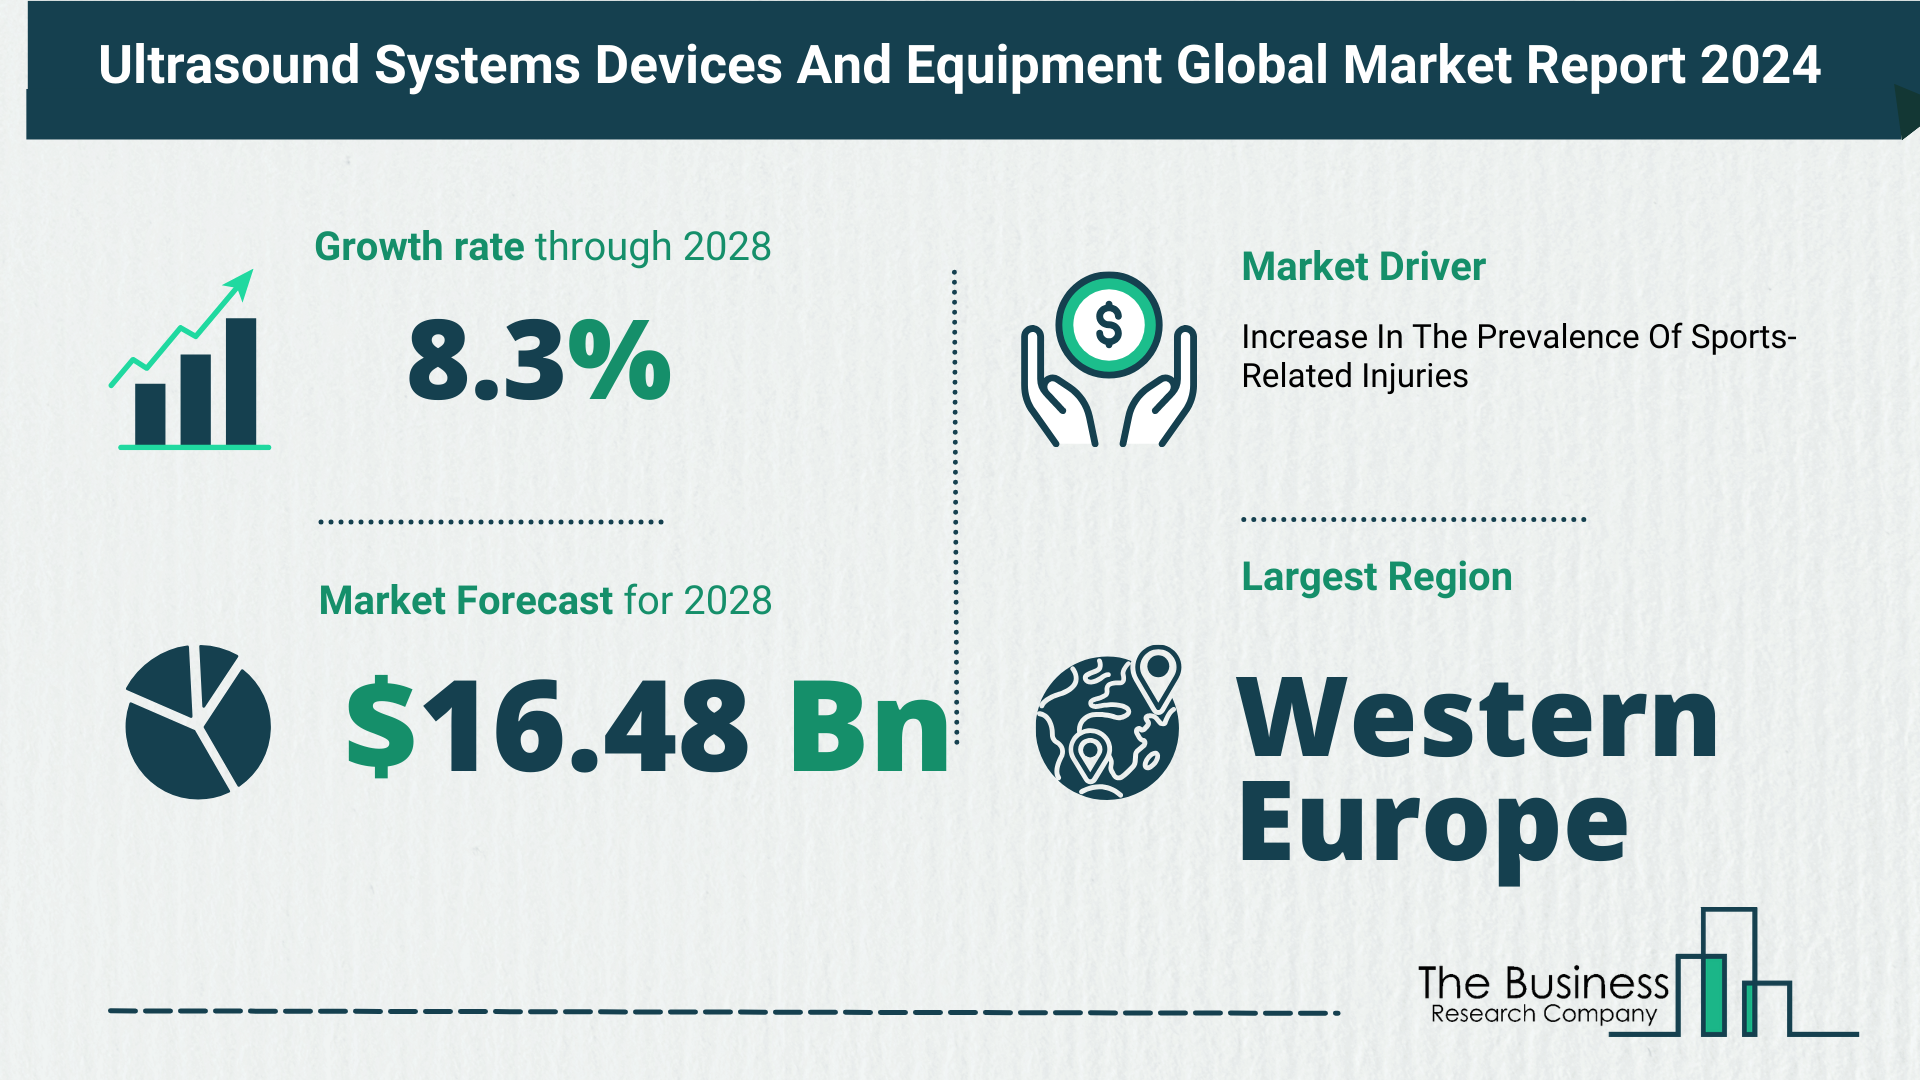 Ultrasound Systems Devices And Equipment Market Report 2024: Market Size, Drivers, And Trends